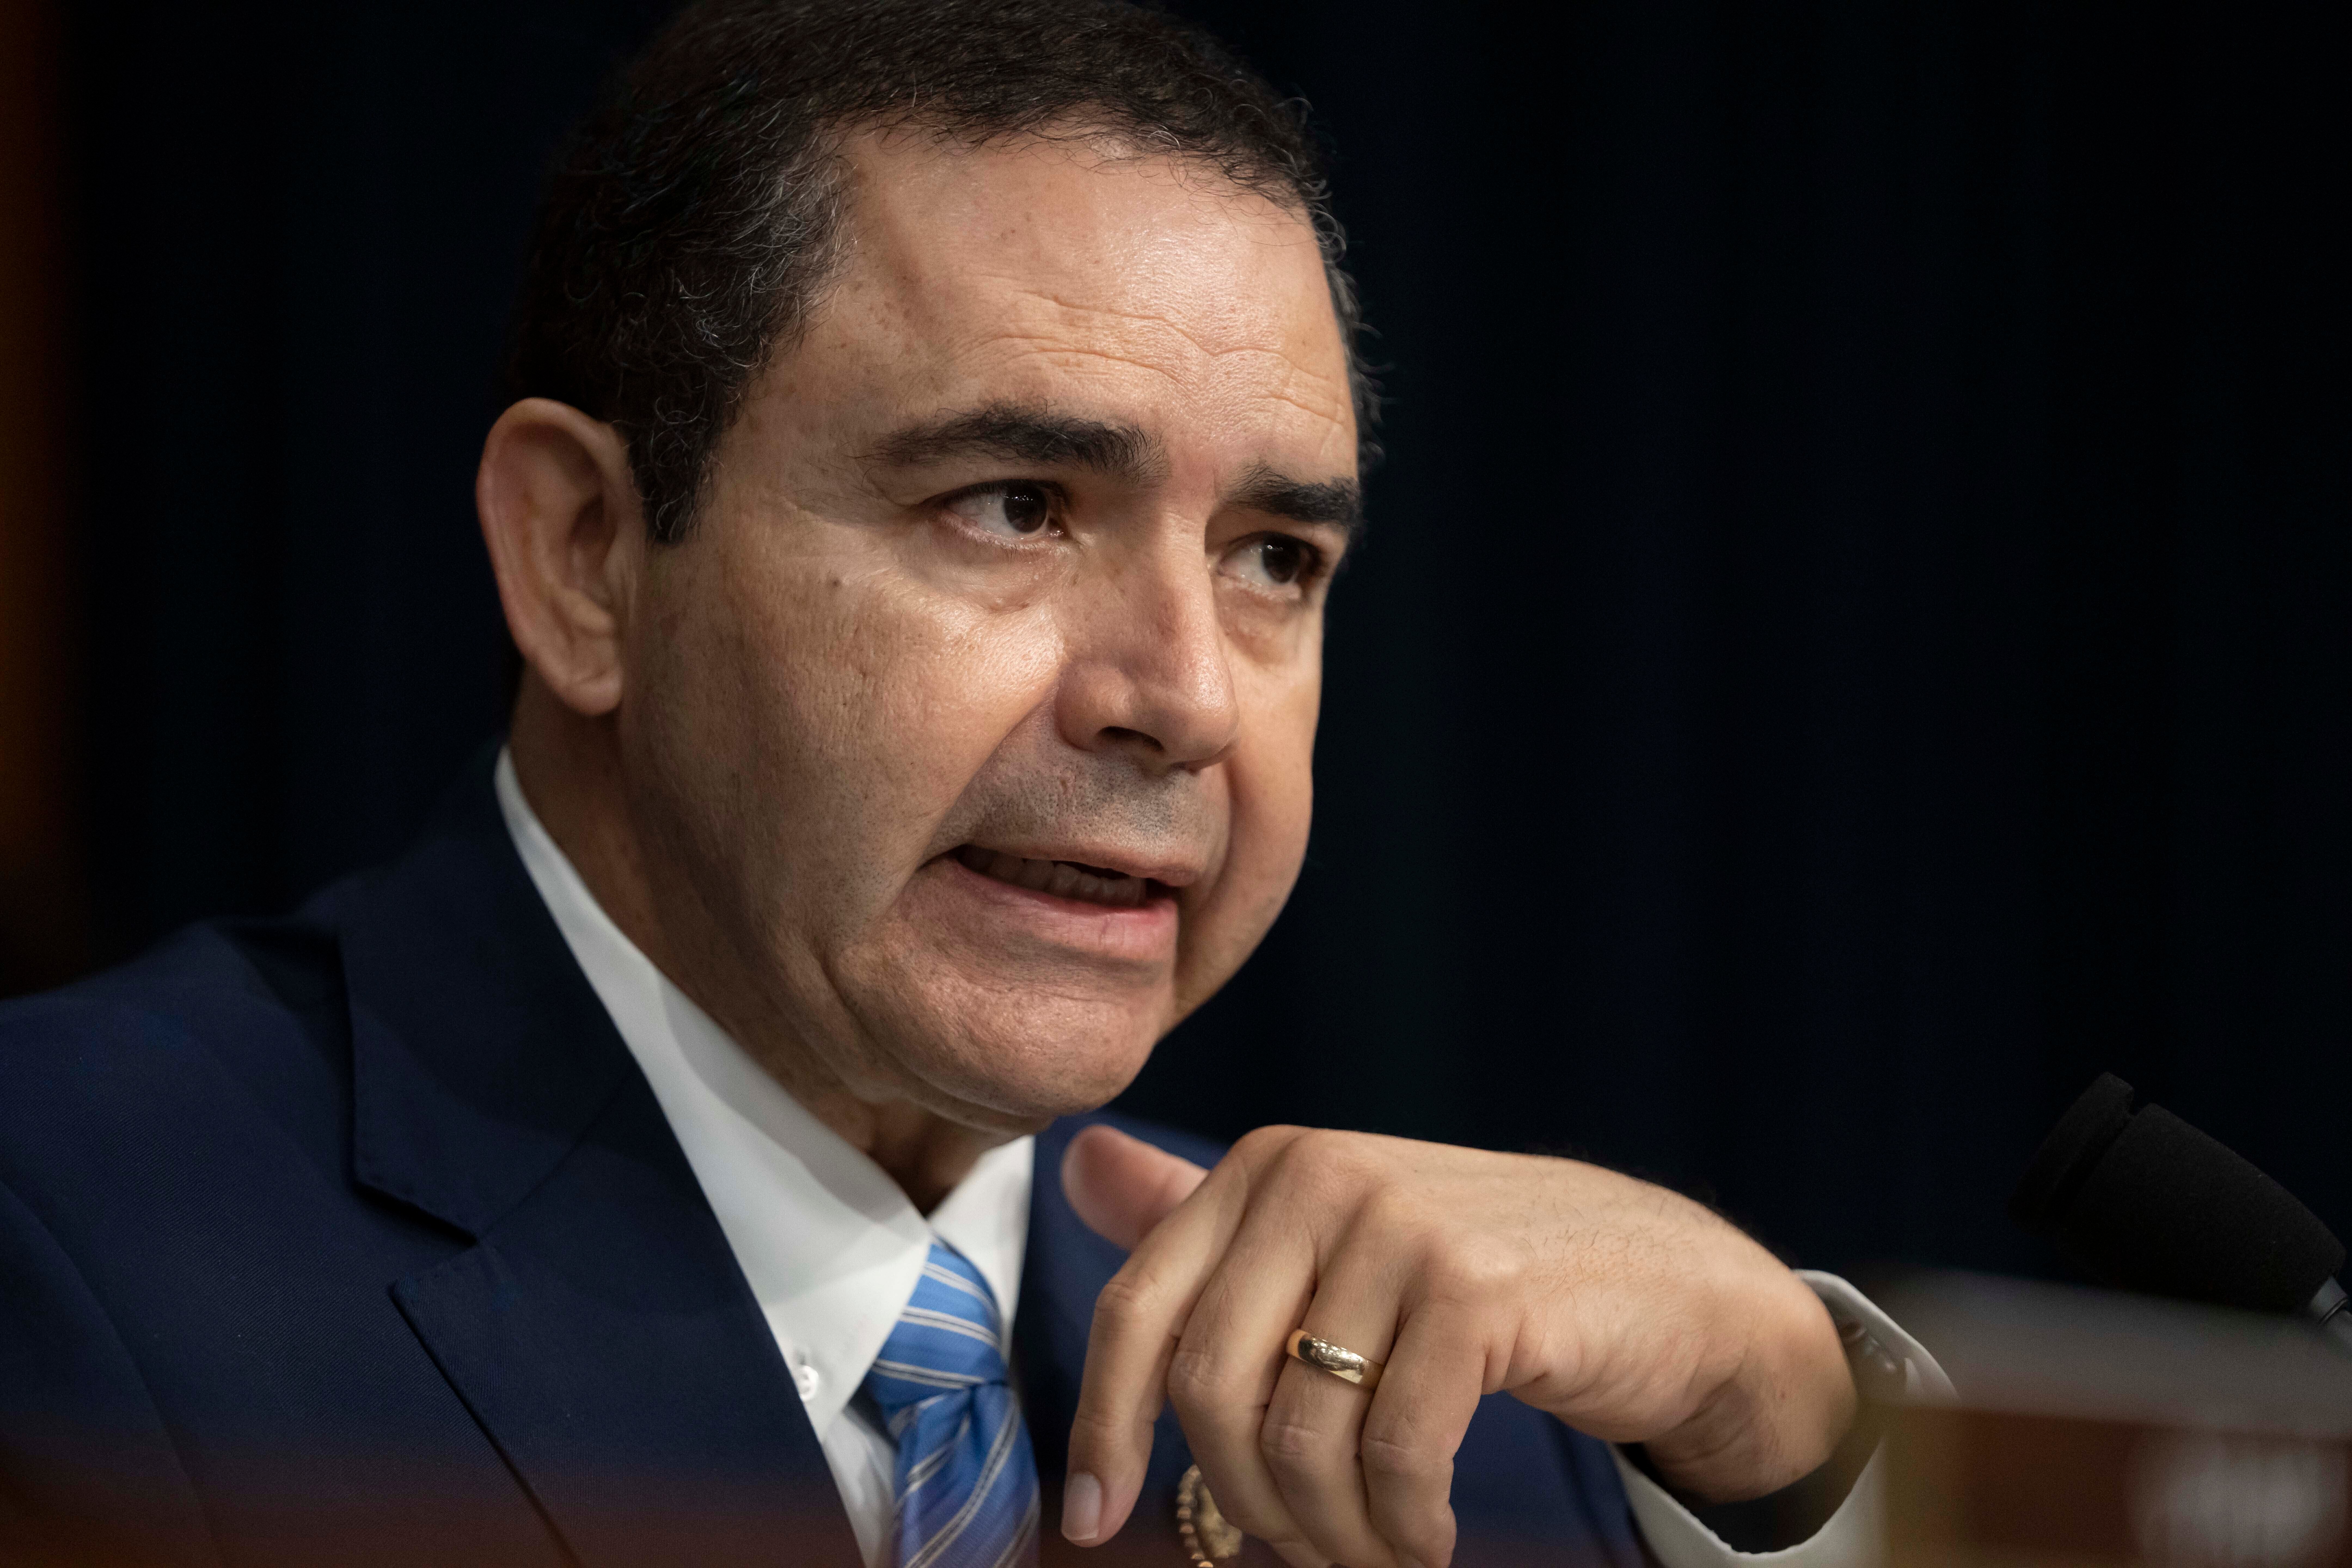 Rep. Henry Cuellar Indicted on Bribery and Money Laundering Charges